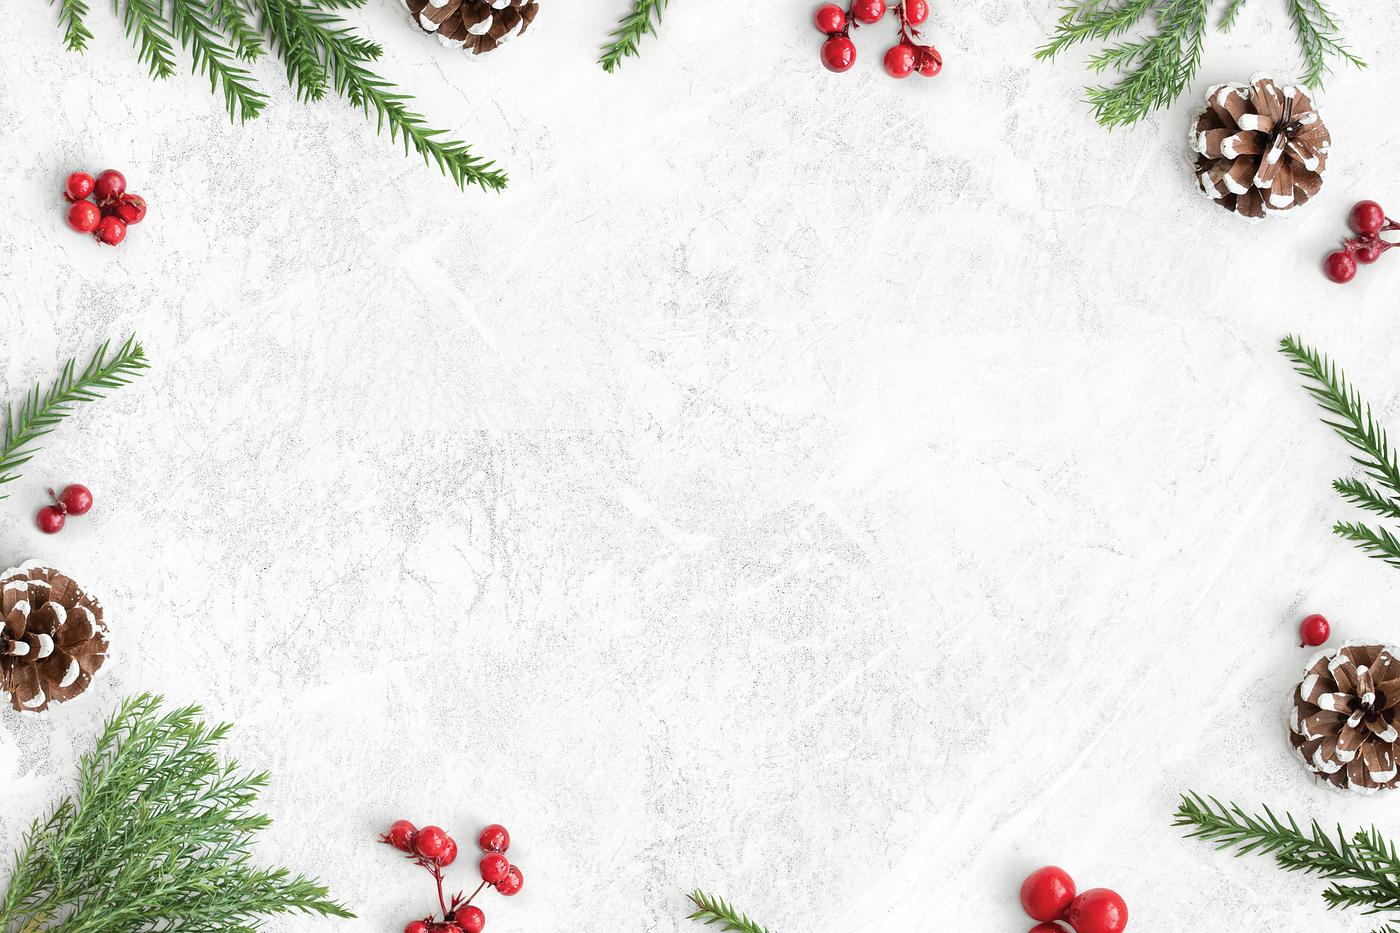 Download Christmas decorations on table background mockup | Royalty free stock psd mockup - 520159